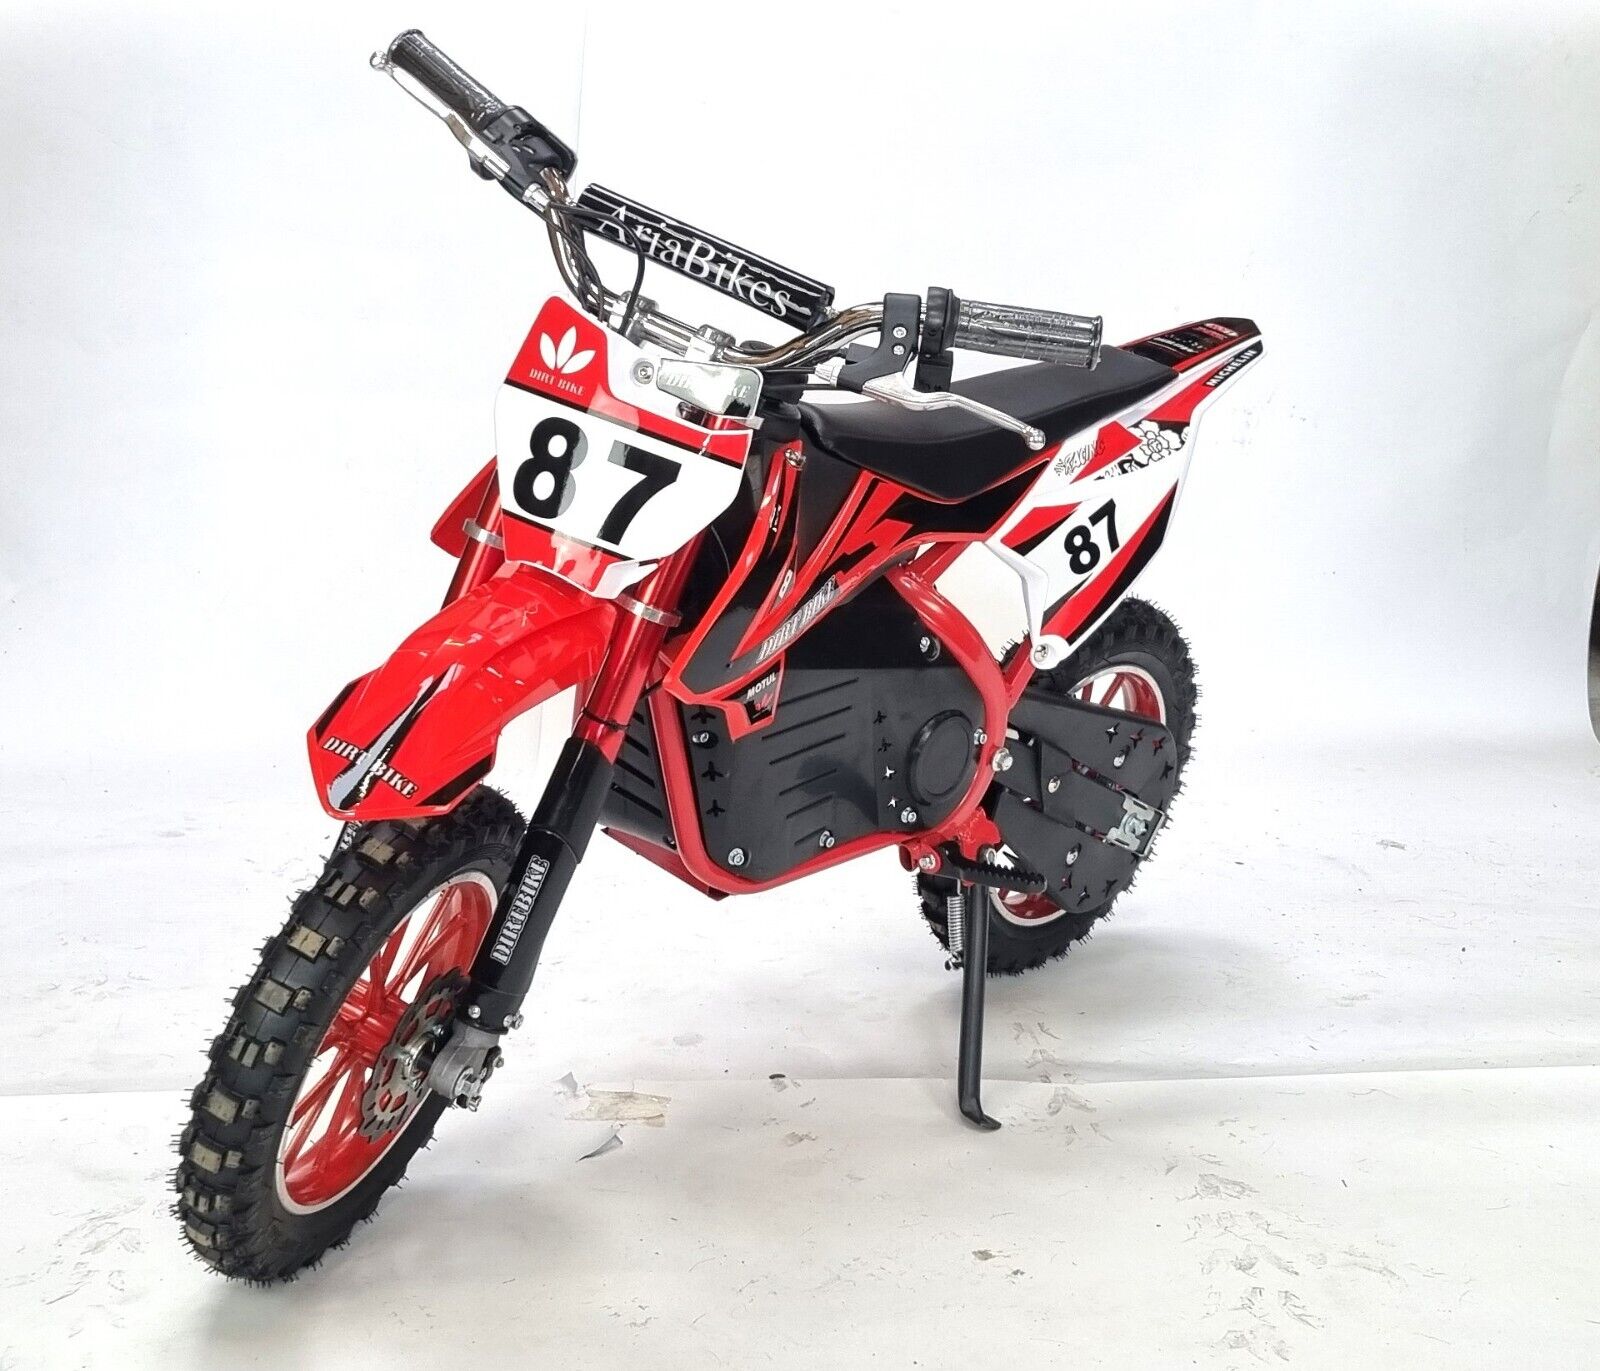 Special-Edition Off-Road Dirt Bike